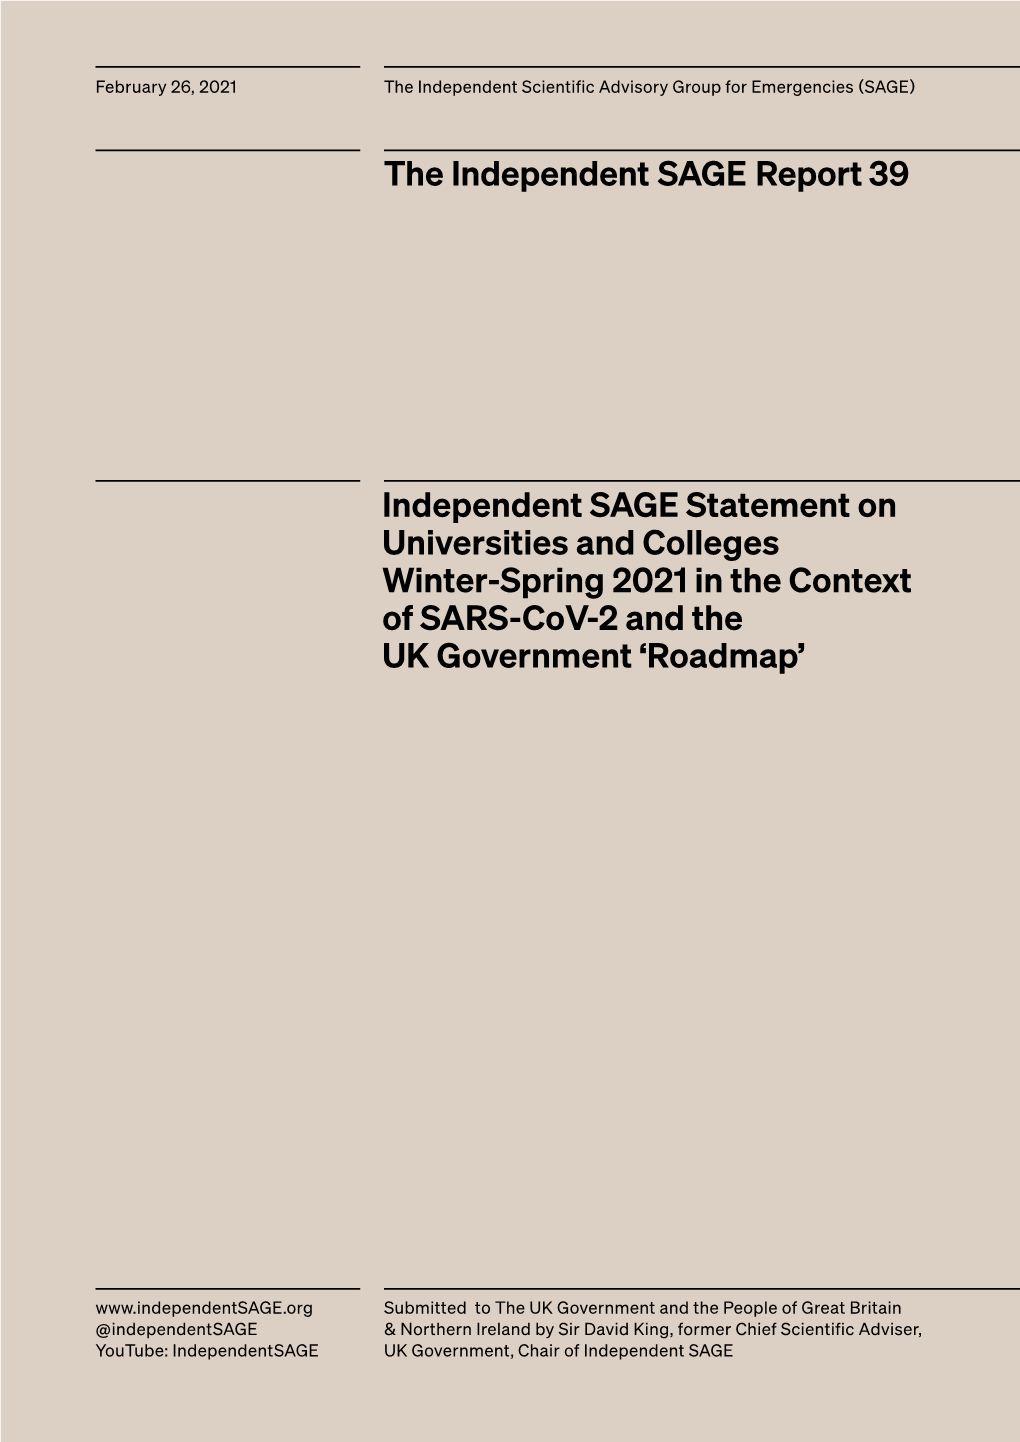 Independent SAGE Statement on Universities and Colleges Winter-Spring 2021 in the Context of SARS-Cov-2 and the UK Government ‘Roadmap’